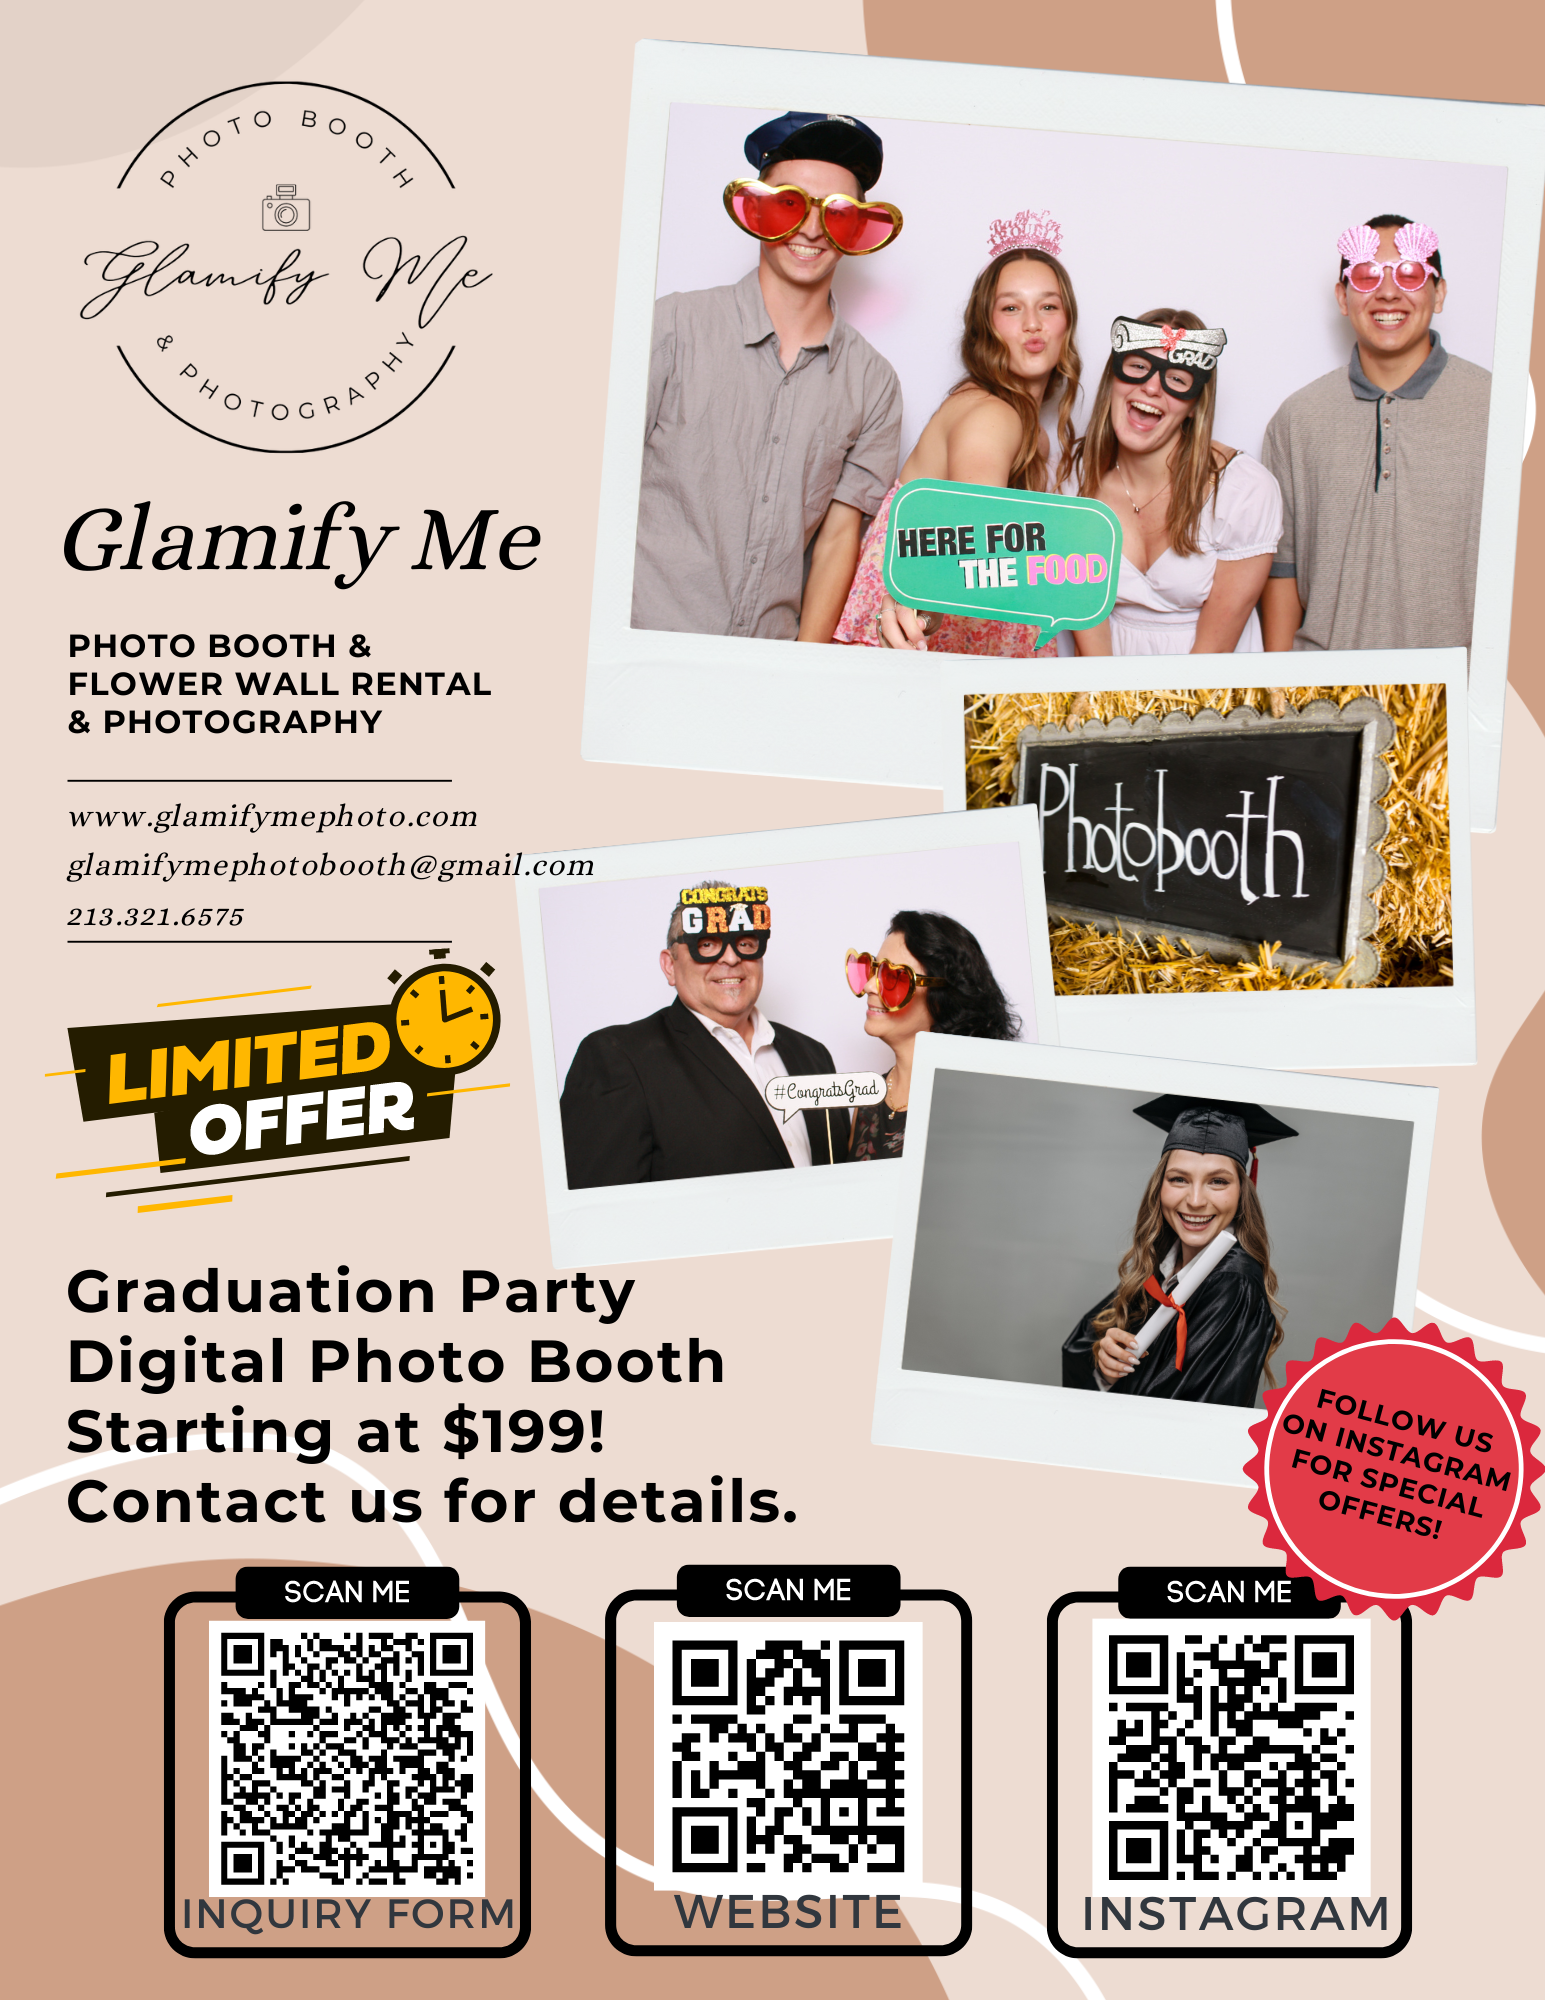 Glamify Me Photo Booth graduation flyer 